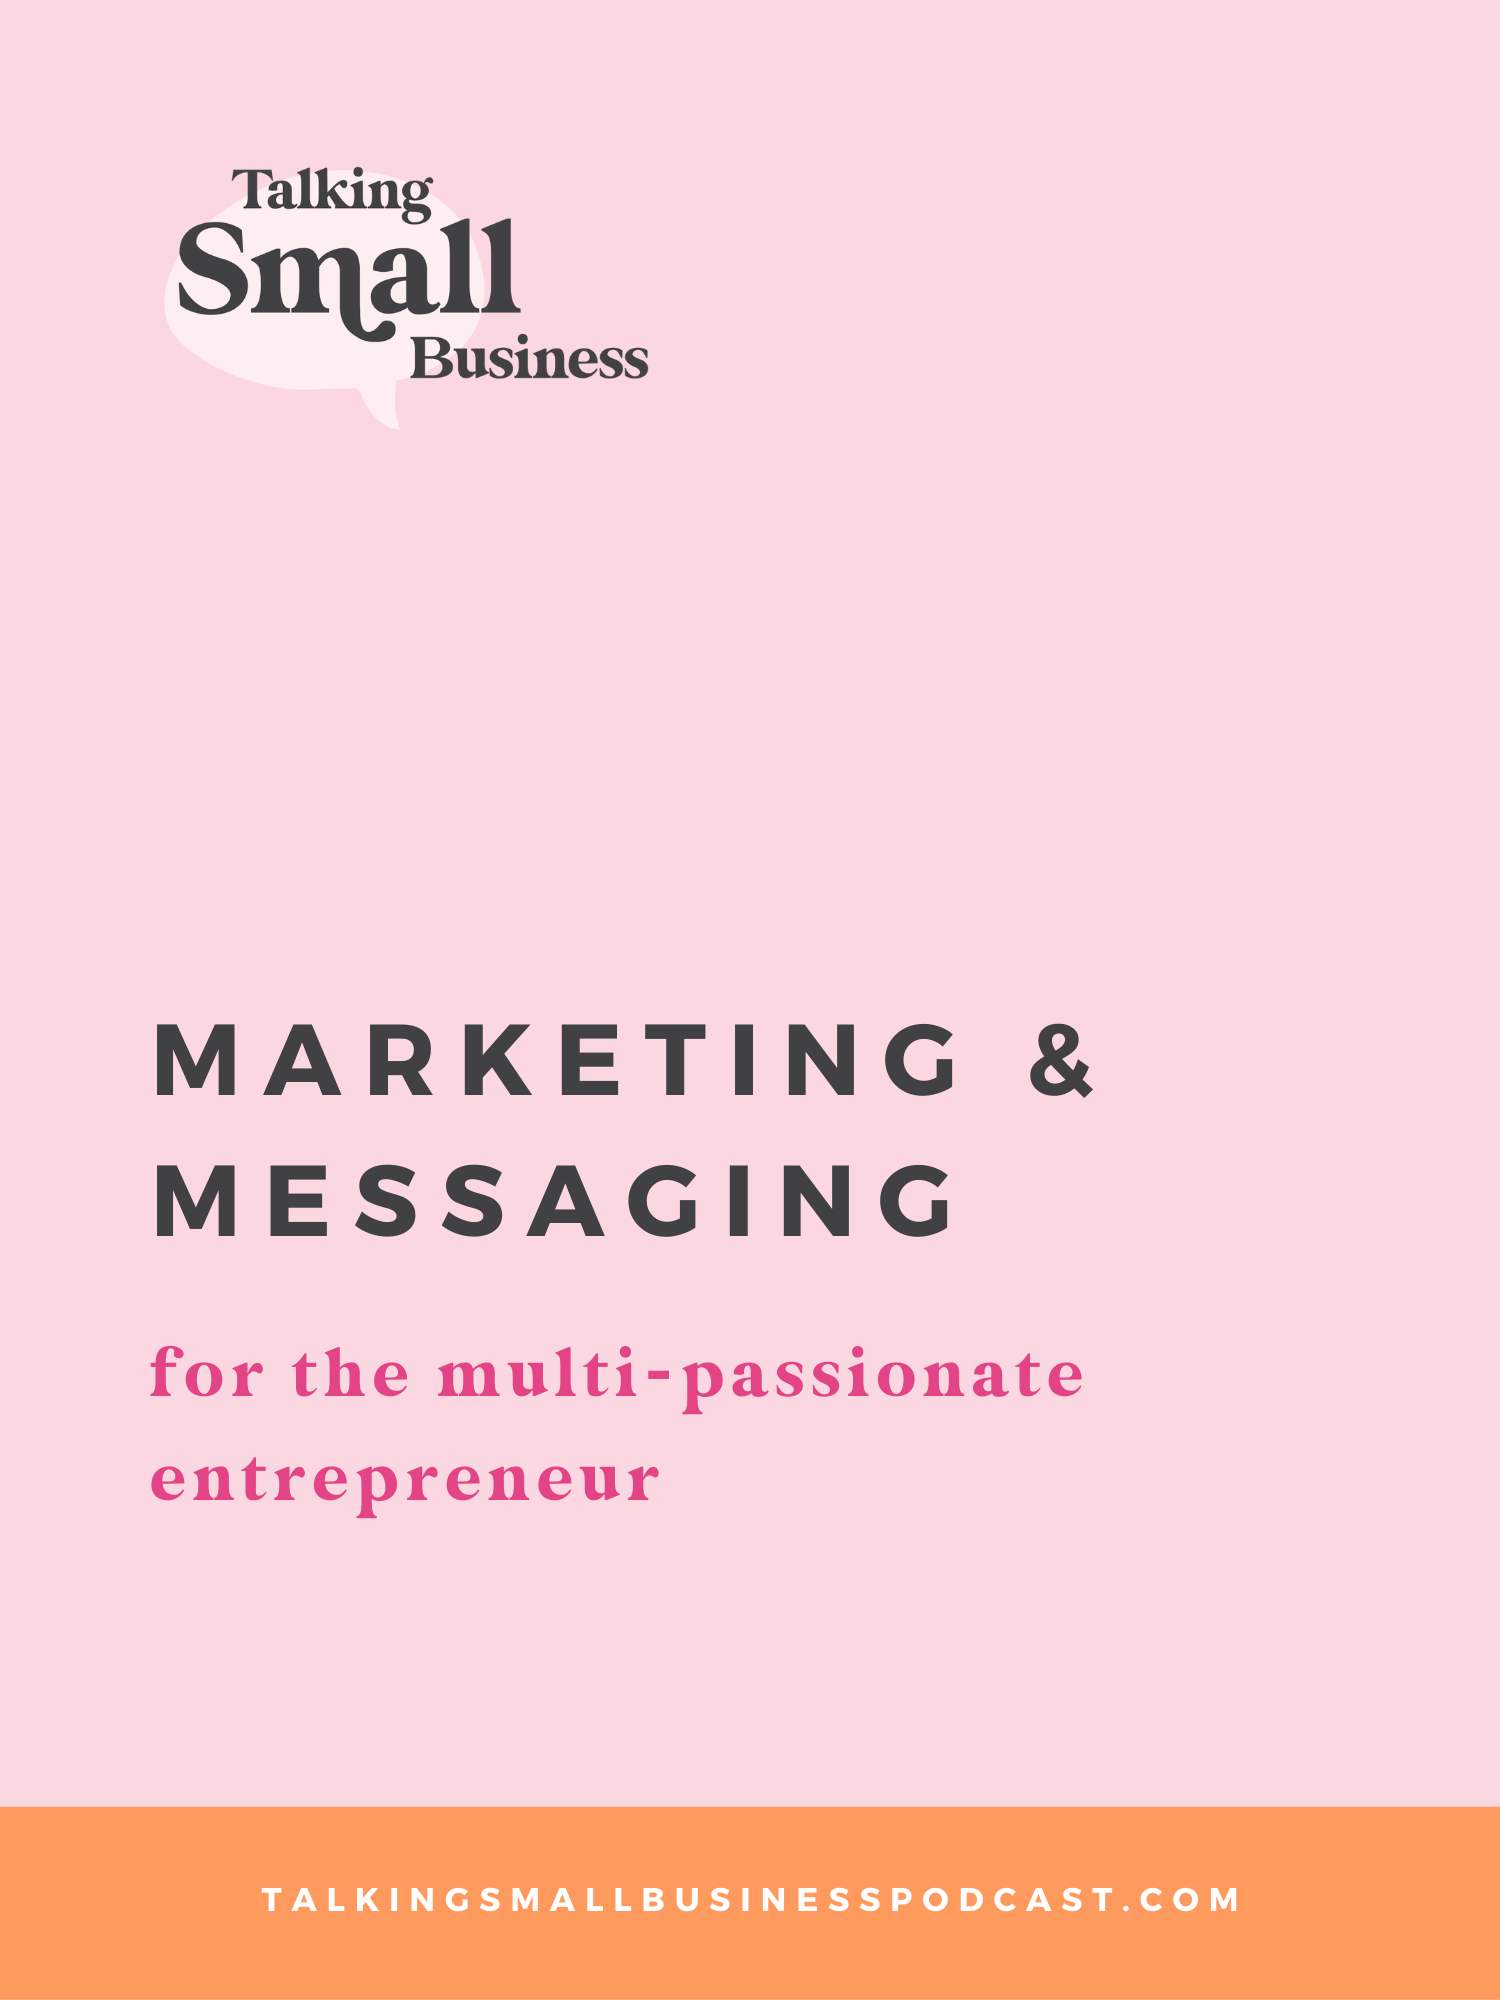 Marketing and Messaging for the Multi Passionate Entrepreneur: tips to grow your brands shared on the Talking Small Business podcast